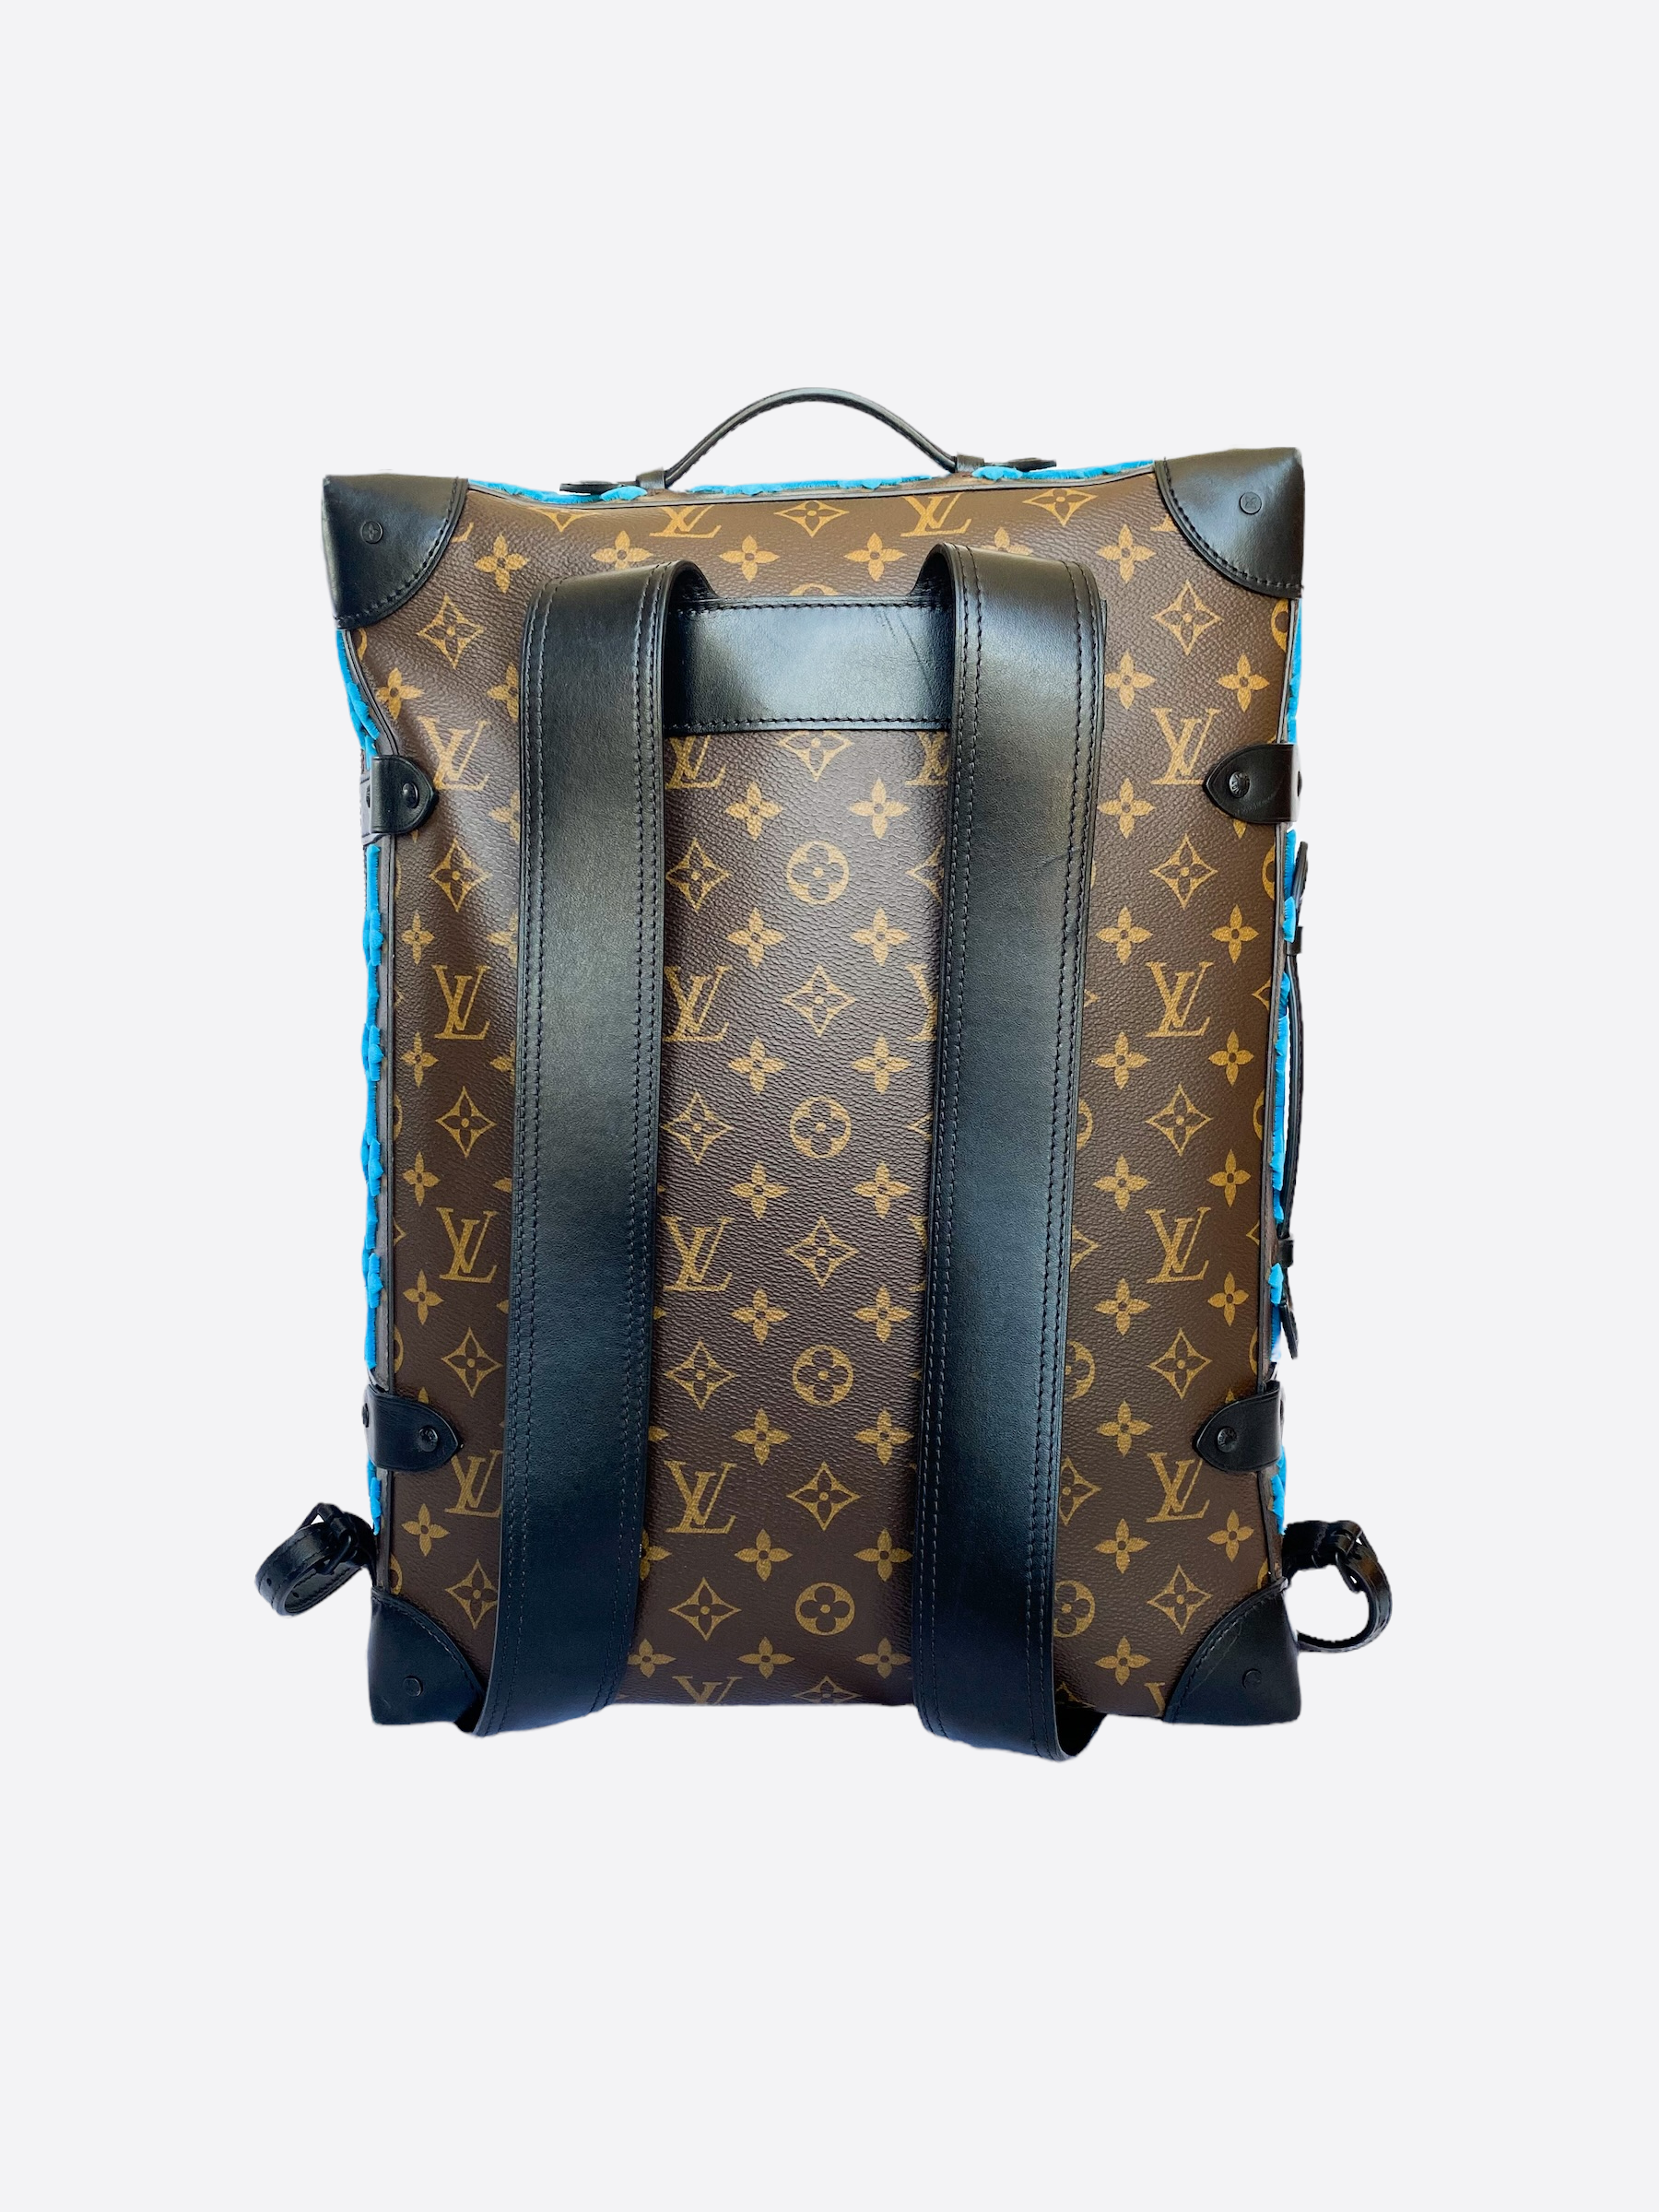 LOUIS VUITTON Monogram Tuffetage Soft Trunk Backpack PM Turquoise 849829